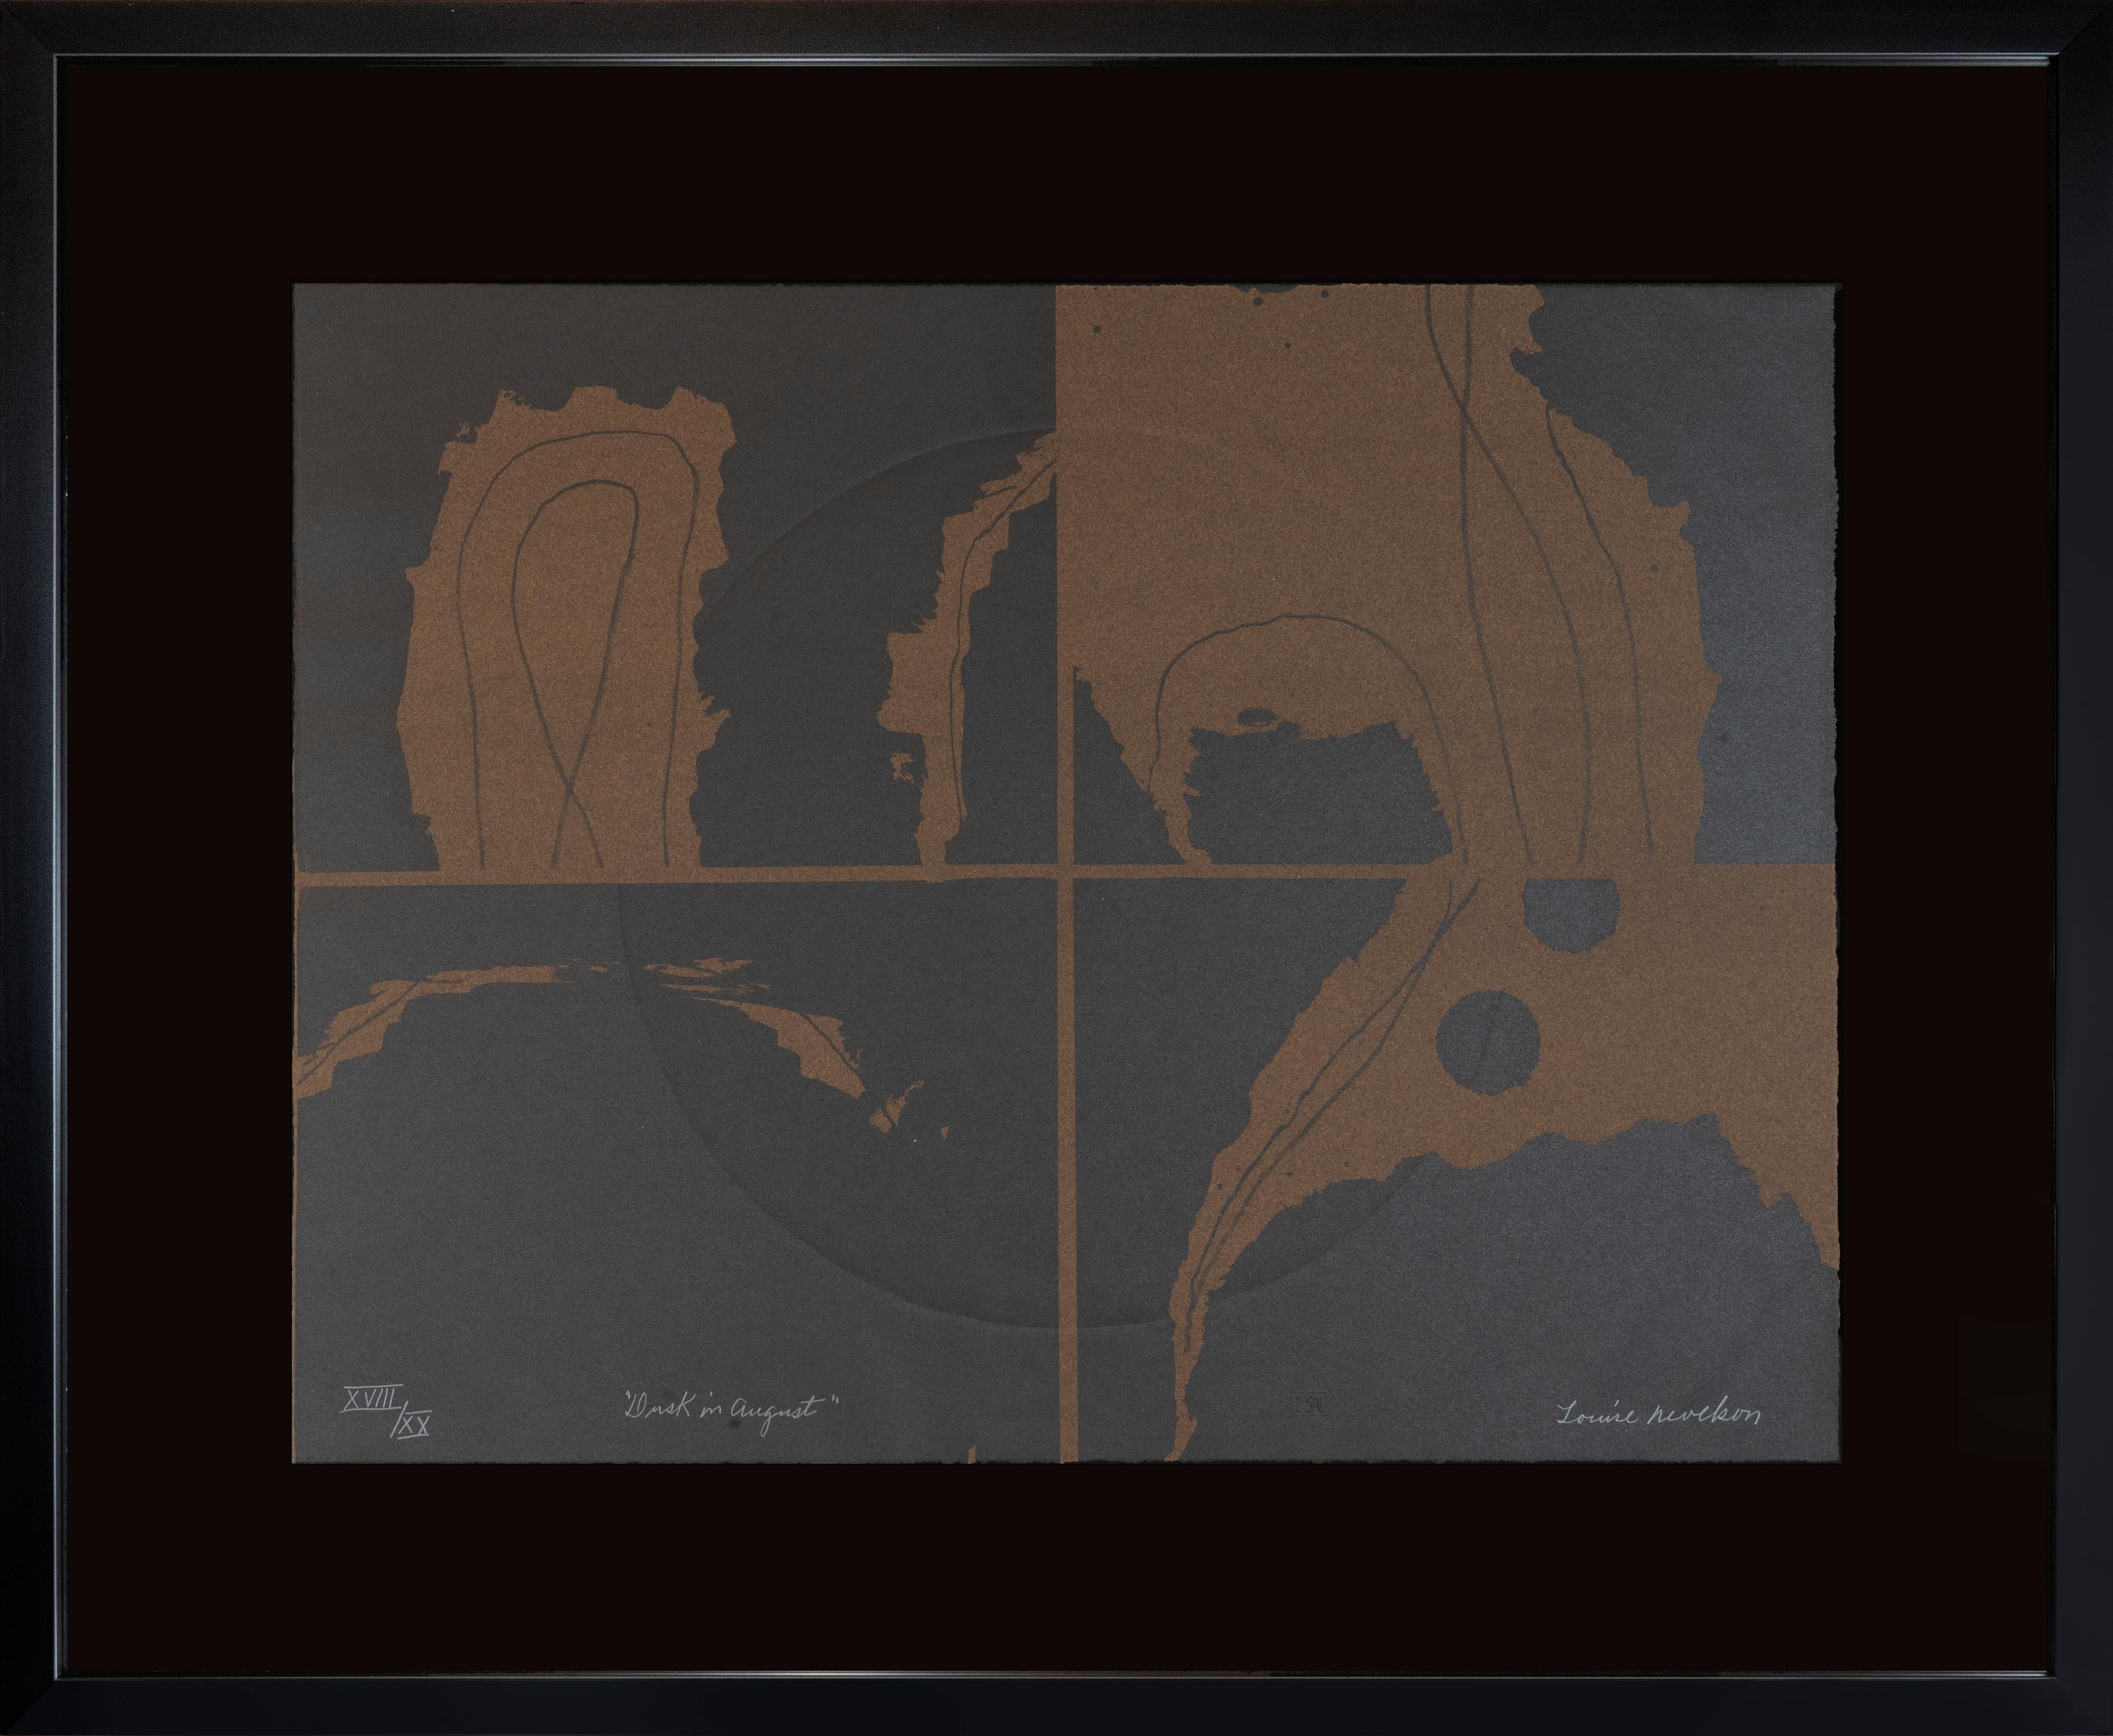 Louise Nevelson Abstract Print - "Dusk in August" from the Portfolio of Nine